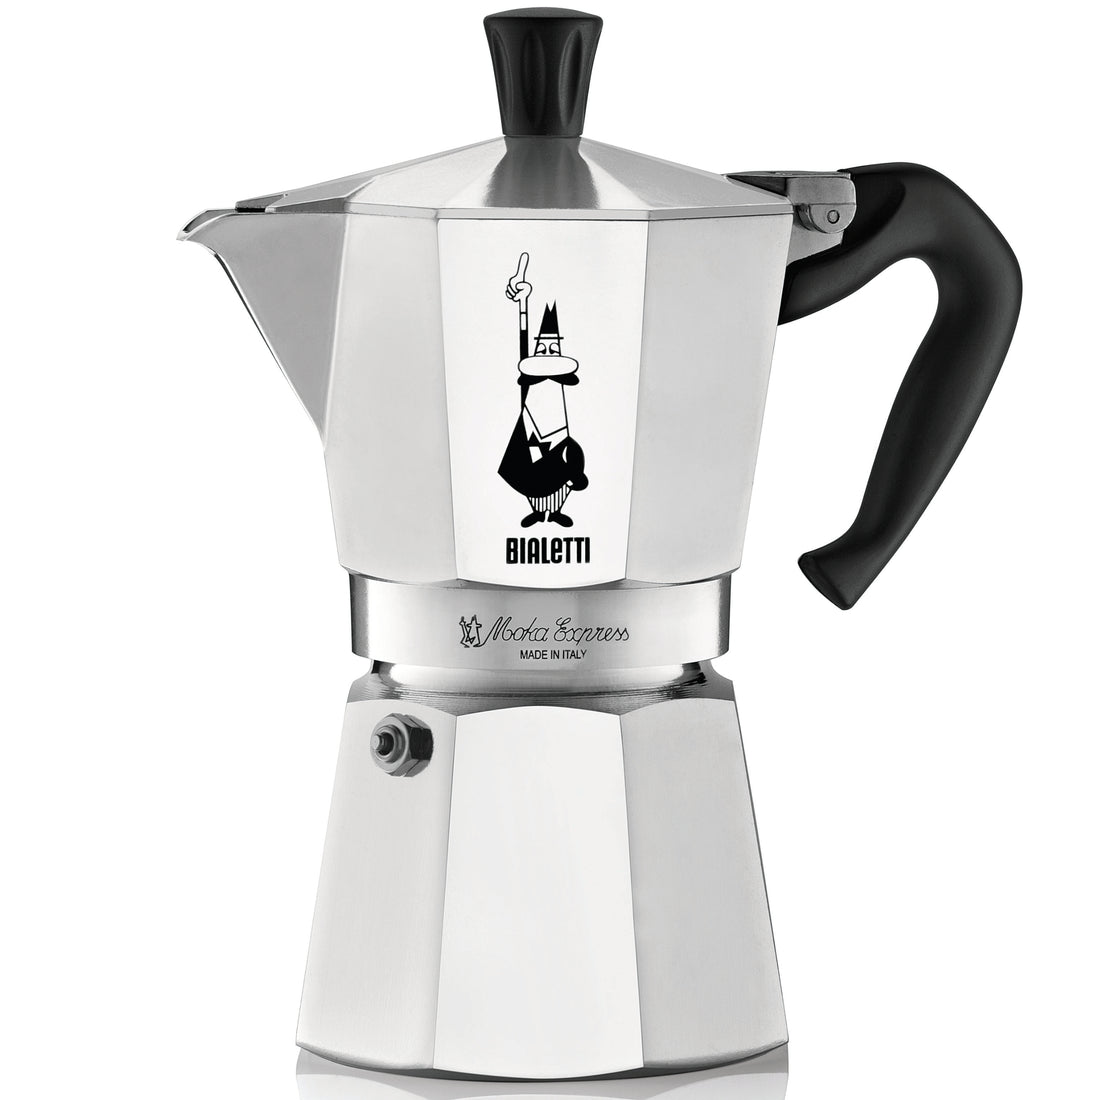 Moka 2 Cup Espresso Coffee maker, overview and use. 